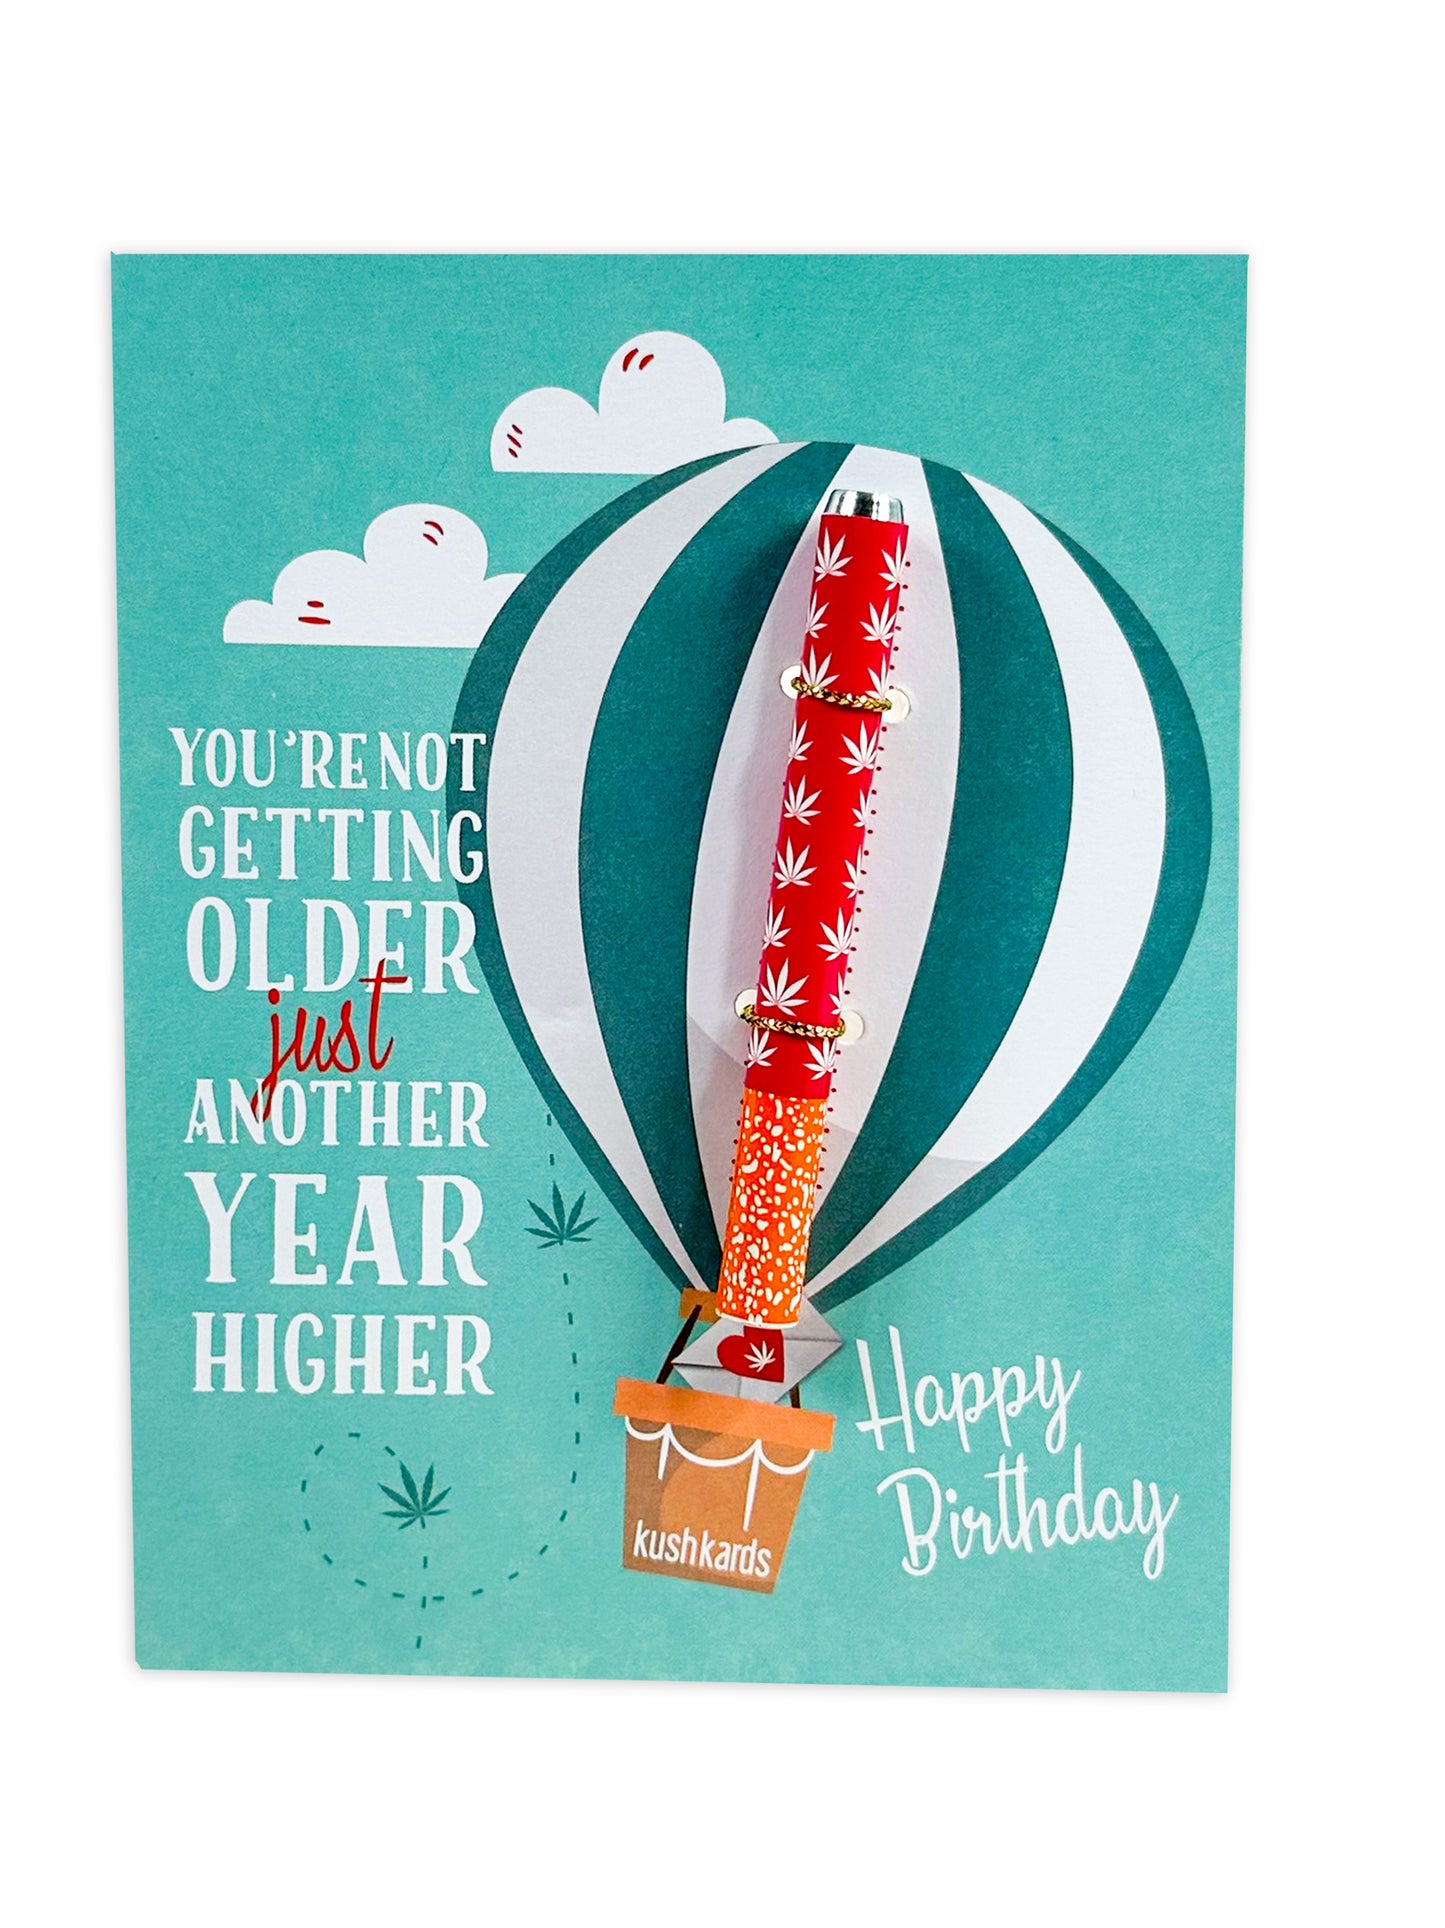 Another Year Higher Birthday Cannabis Greeting Card